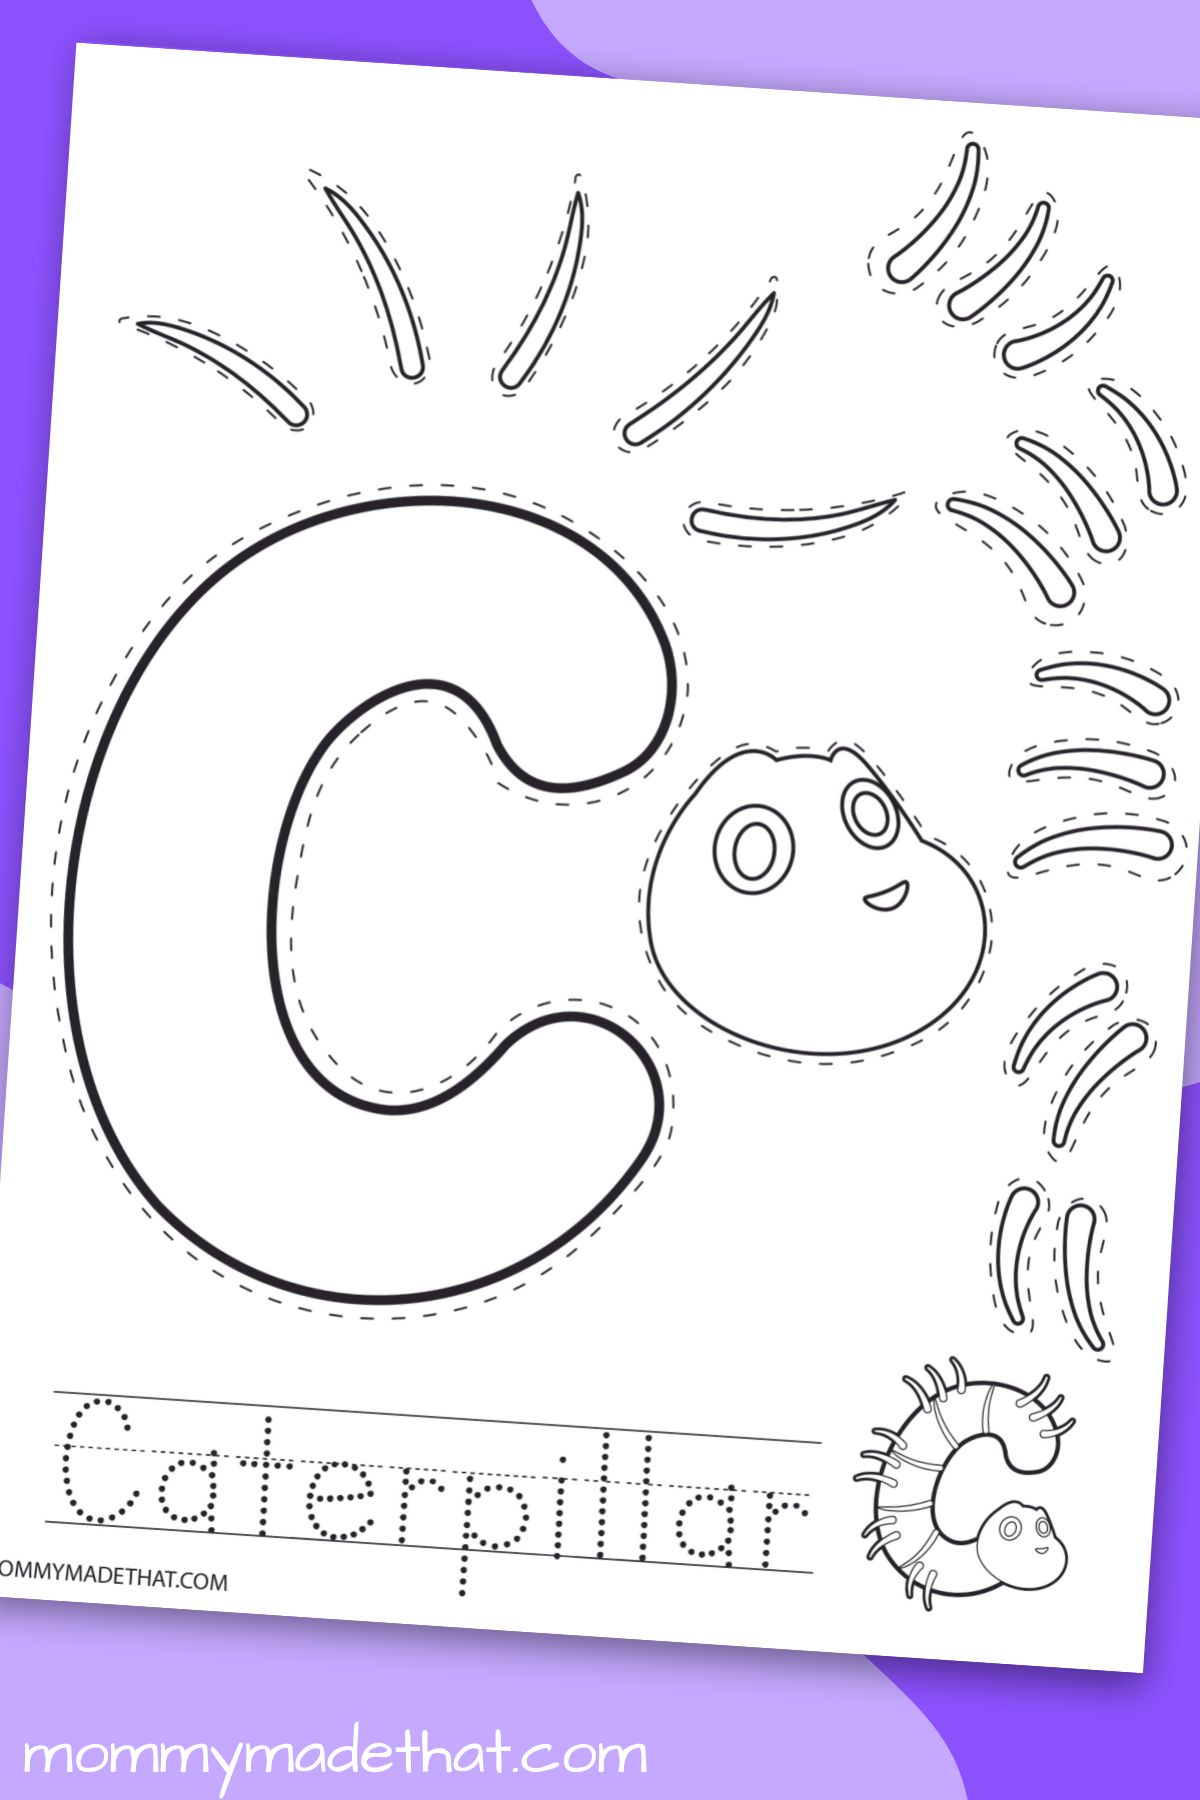 C is for Caterpillar: Free Printable Letter C Craft